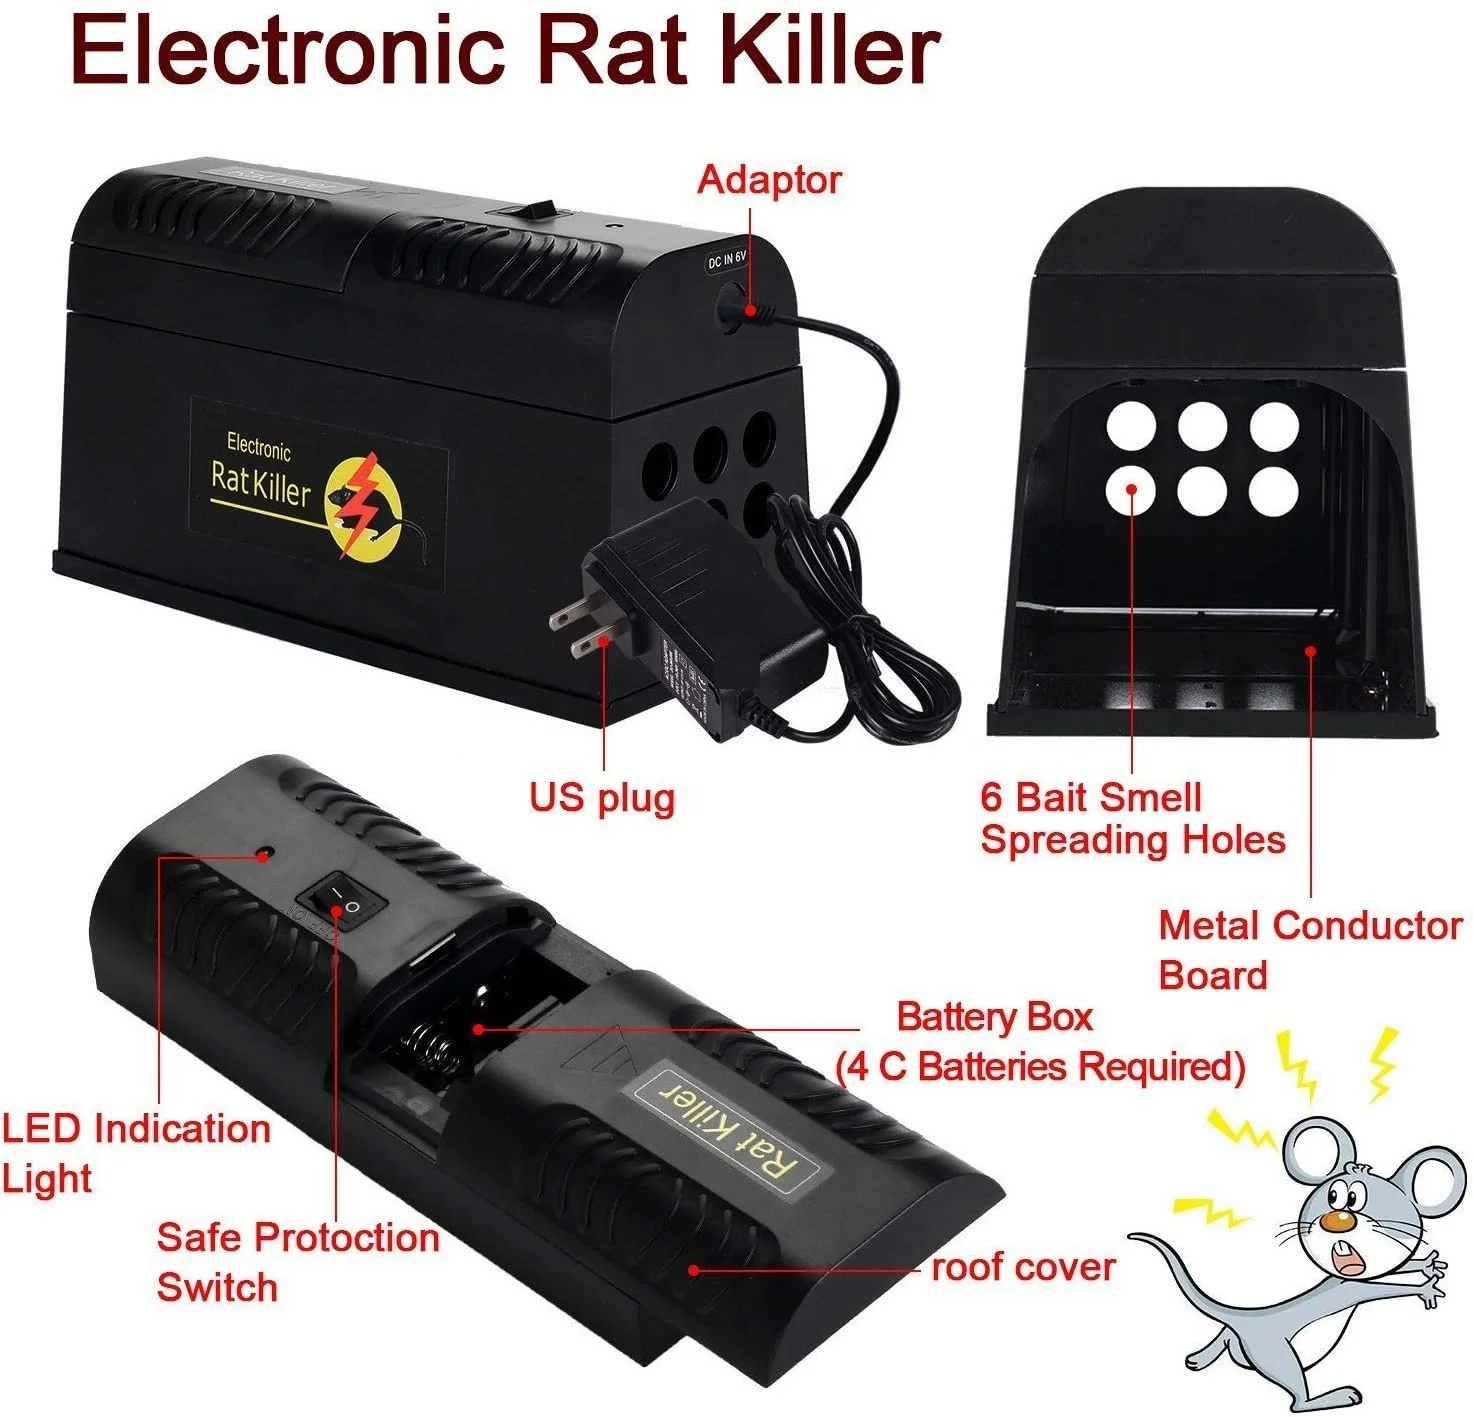 
EPA Indoor Outdoor High Voltage Electronic Rodent Killer Humane Electric Shock Mouse Trap for Hunting Mice Rat Mole Vole Marten 